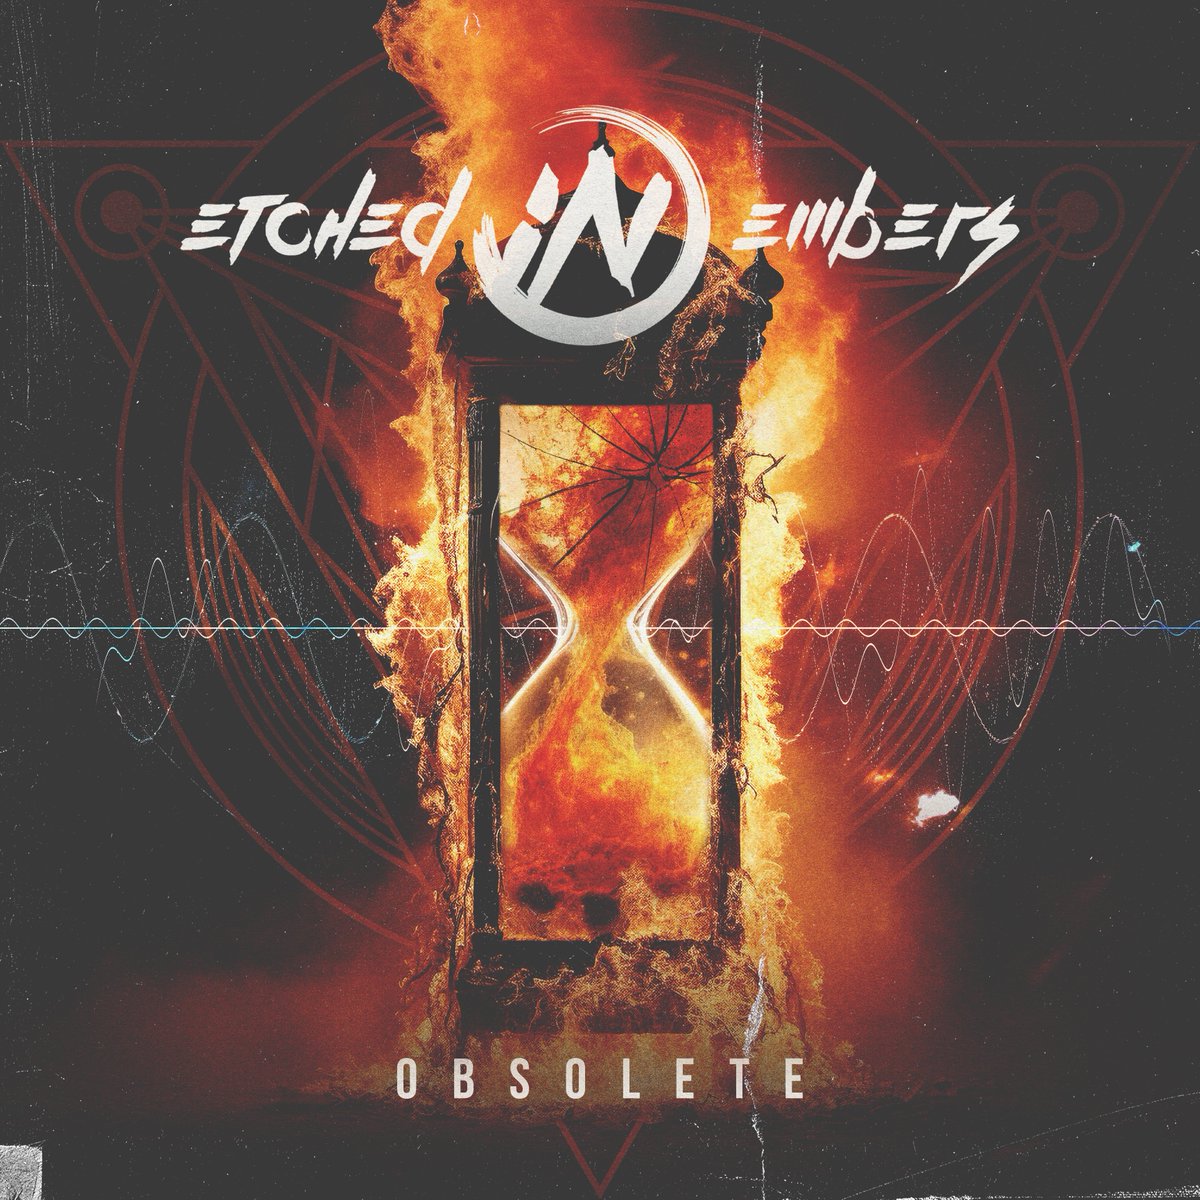 Our Debut Album 'Obsolete' is #OutNow! 
#StreamHere - tinyurl.com/GetObsolete
Get it on CD or Vinyl @ etchedinembers.net
Featuring the #NewSingle #HappySong!
#NewAlbum #DebutAlbum #NewRelease #NewMusic #Obsolete #EtchedinEmbers #MetalMusic #MetalCore #Metal #Rock #HardRock